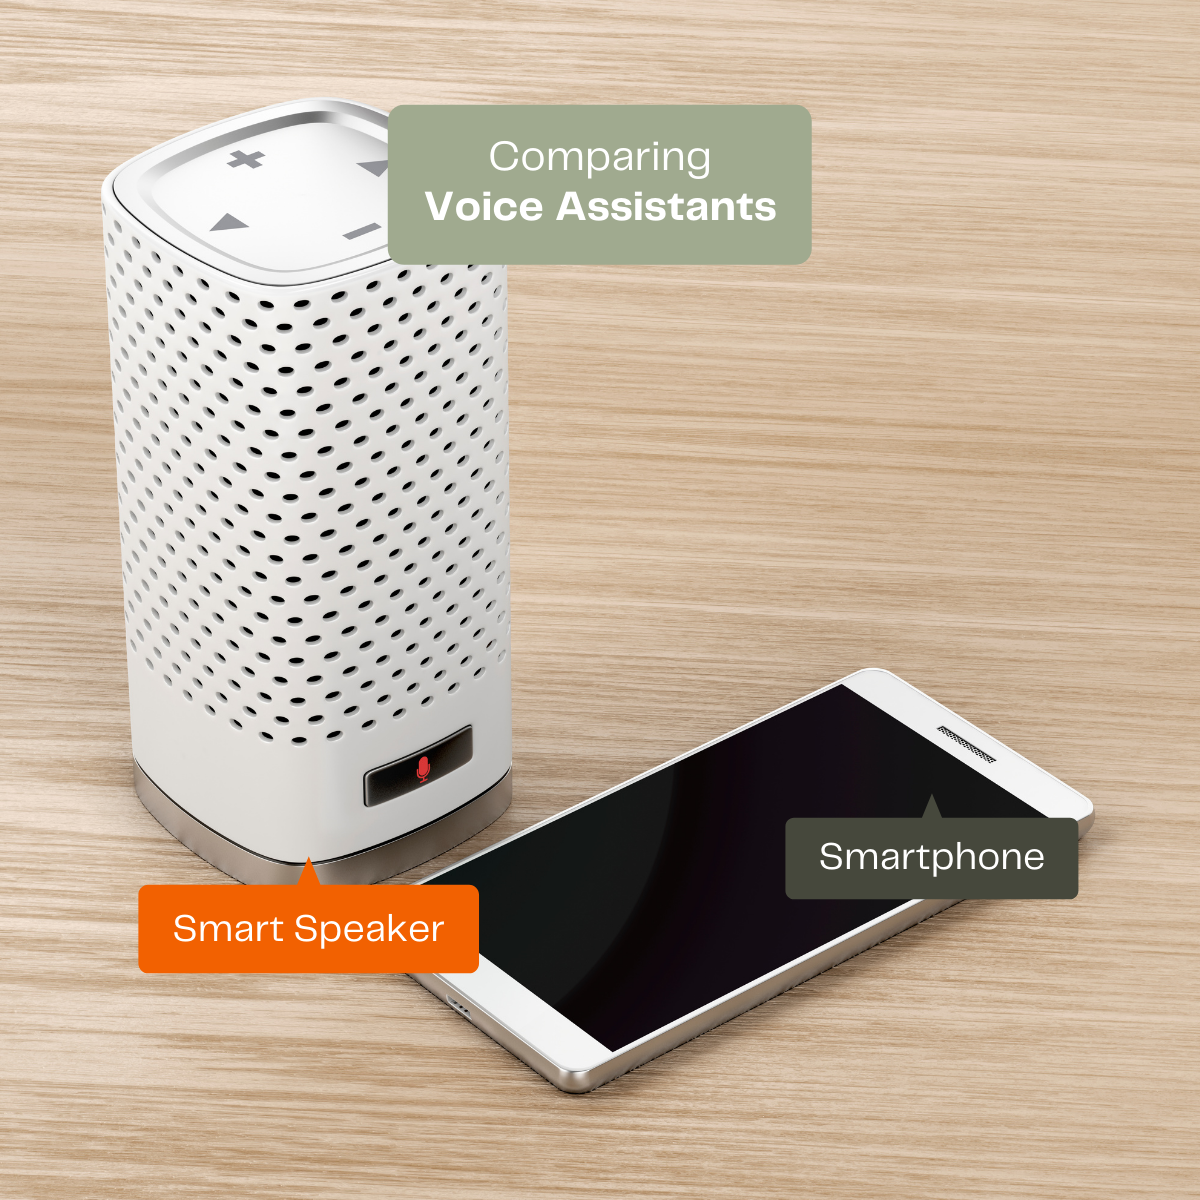 Smart Speaker and Smartphone on a desk.  Voice assistants are most commonly found on smartphones and smart speakers